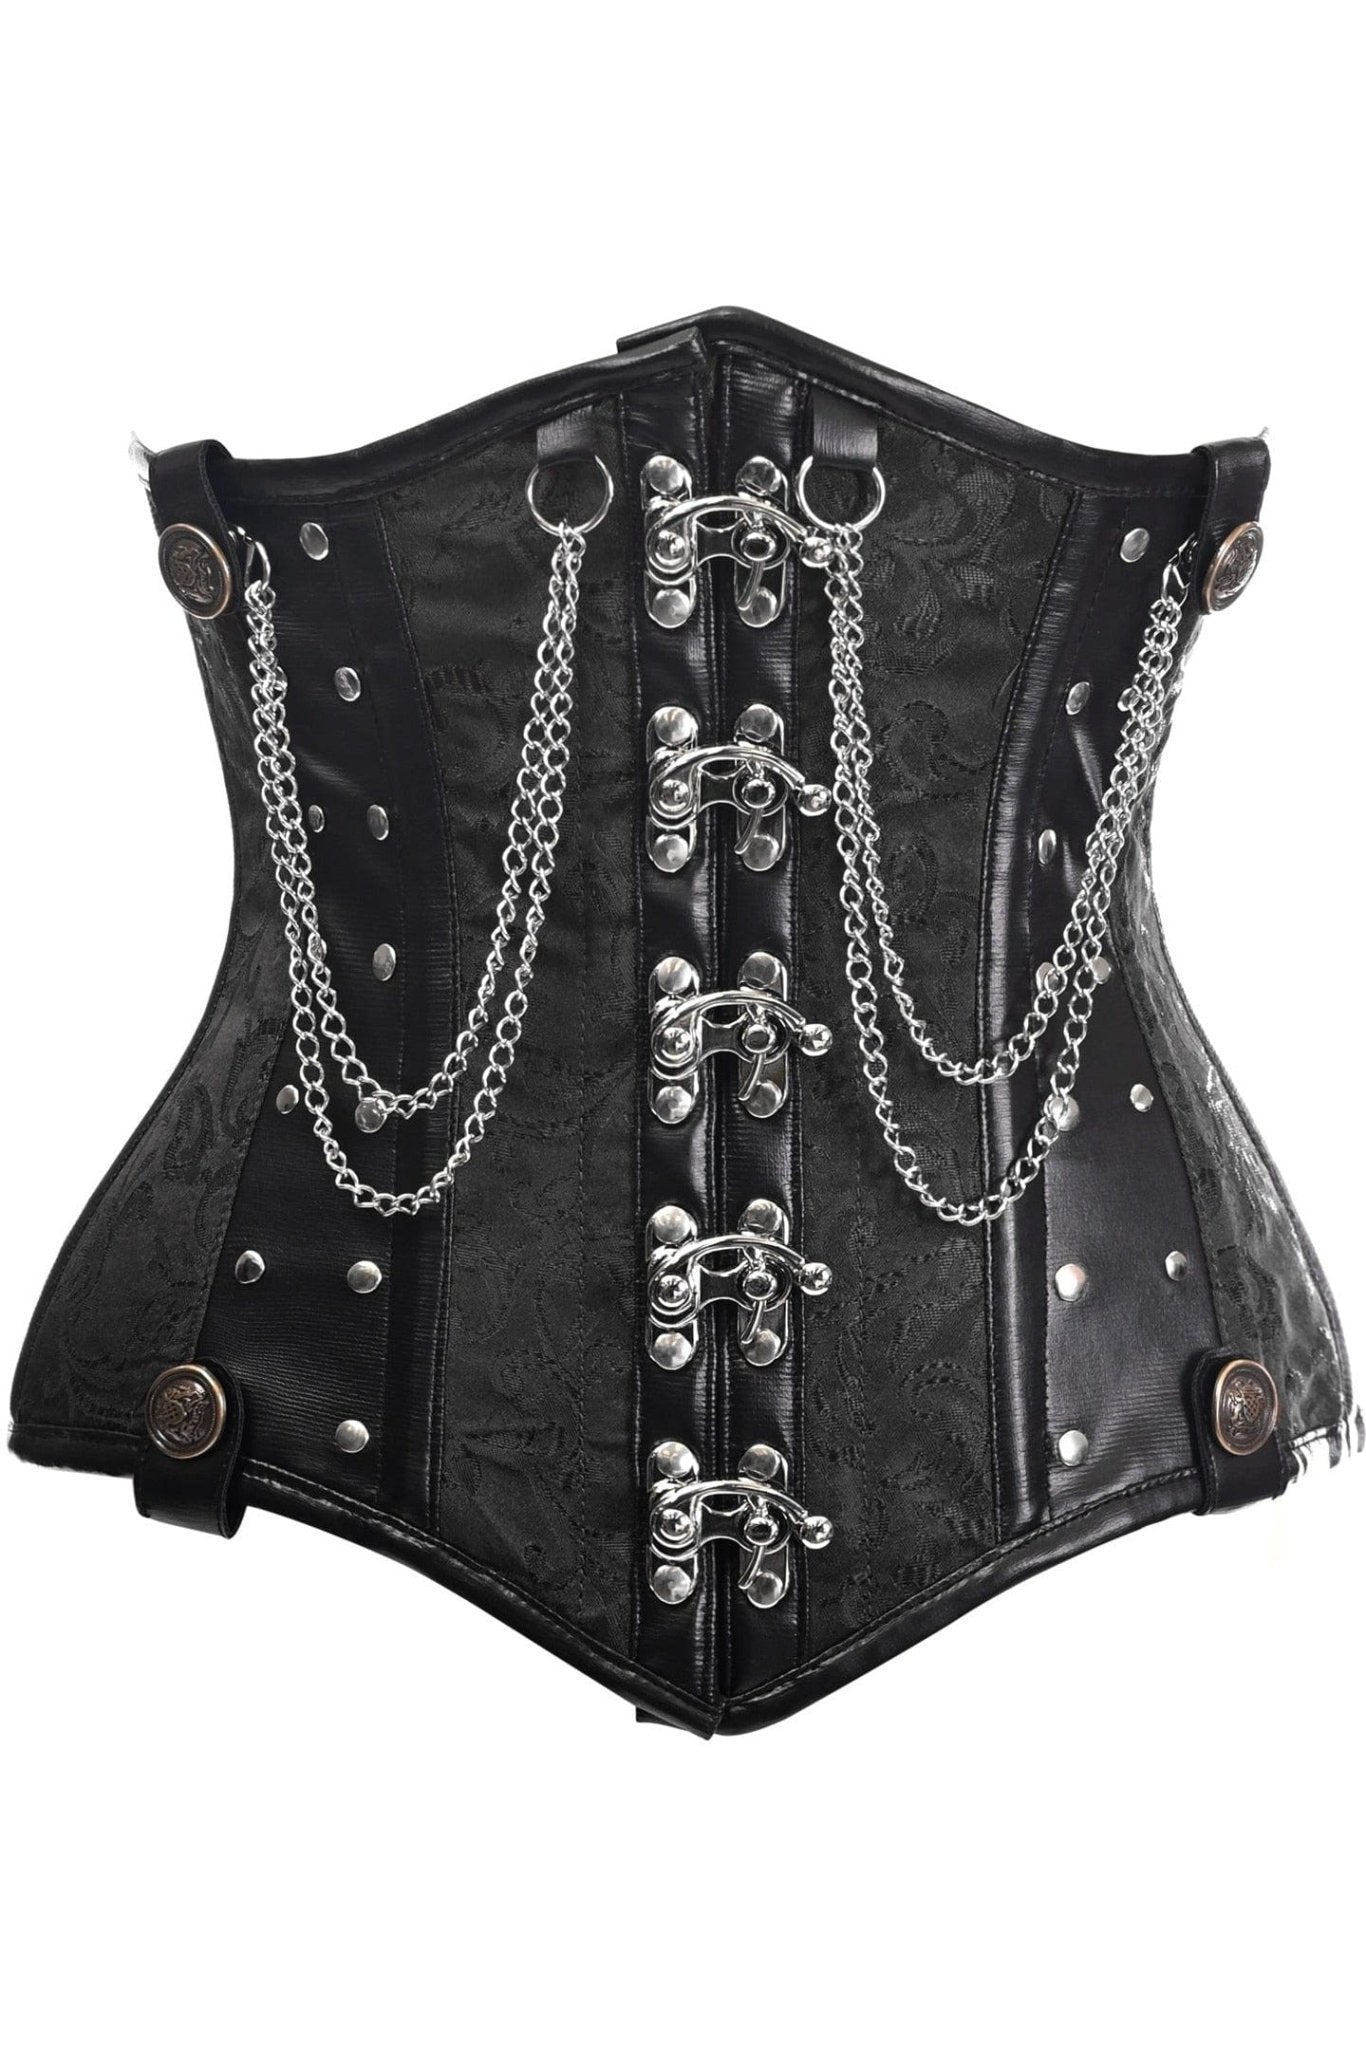 Deluxe Black Brocade Steel Boned Underbust Corset with Chains and Clasps Musotica.com